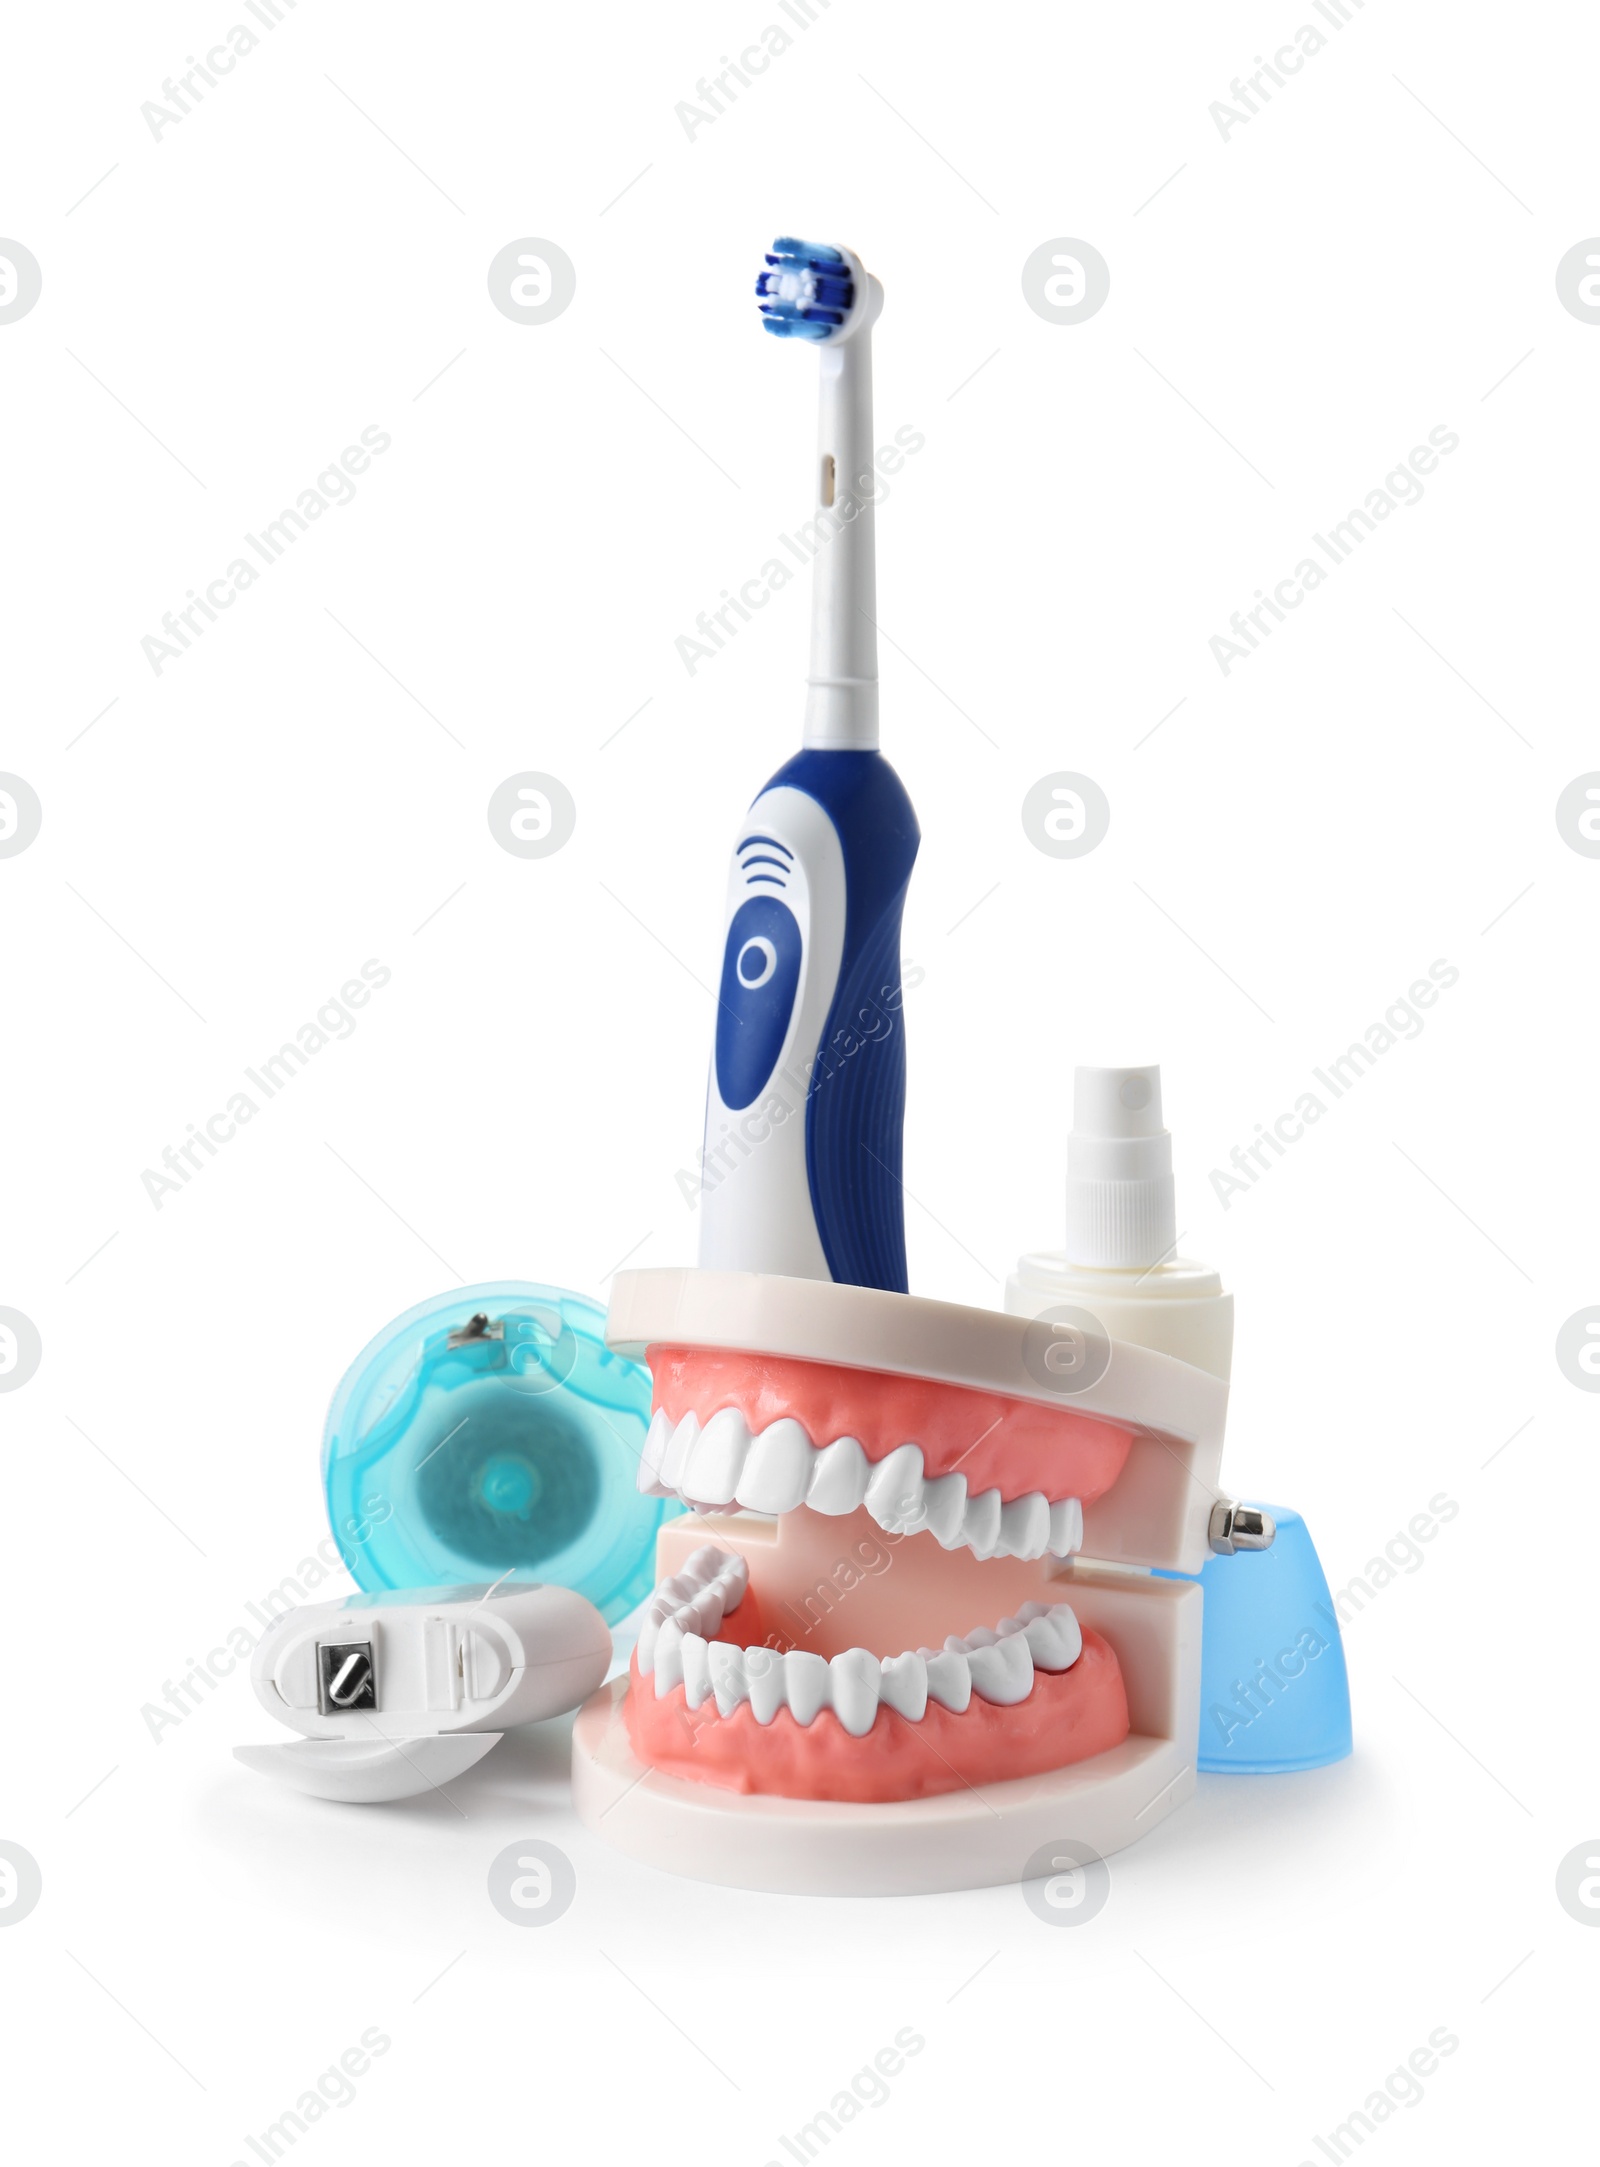 Photo of Composition with model of oral cavity and dental care items on white background. Healthy teeth